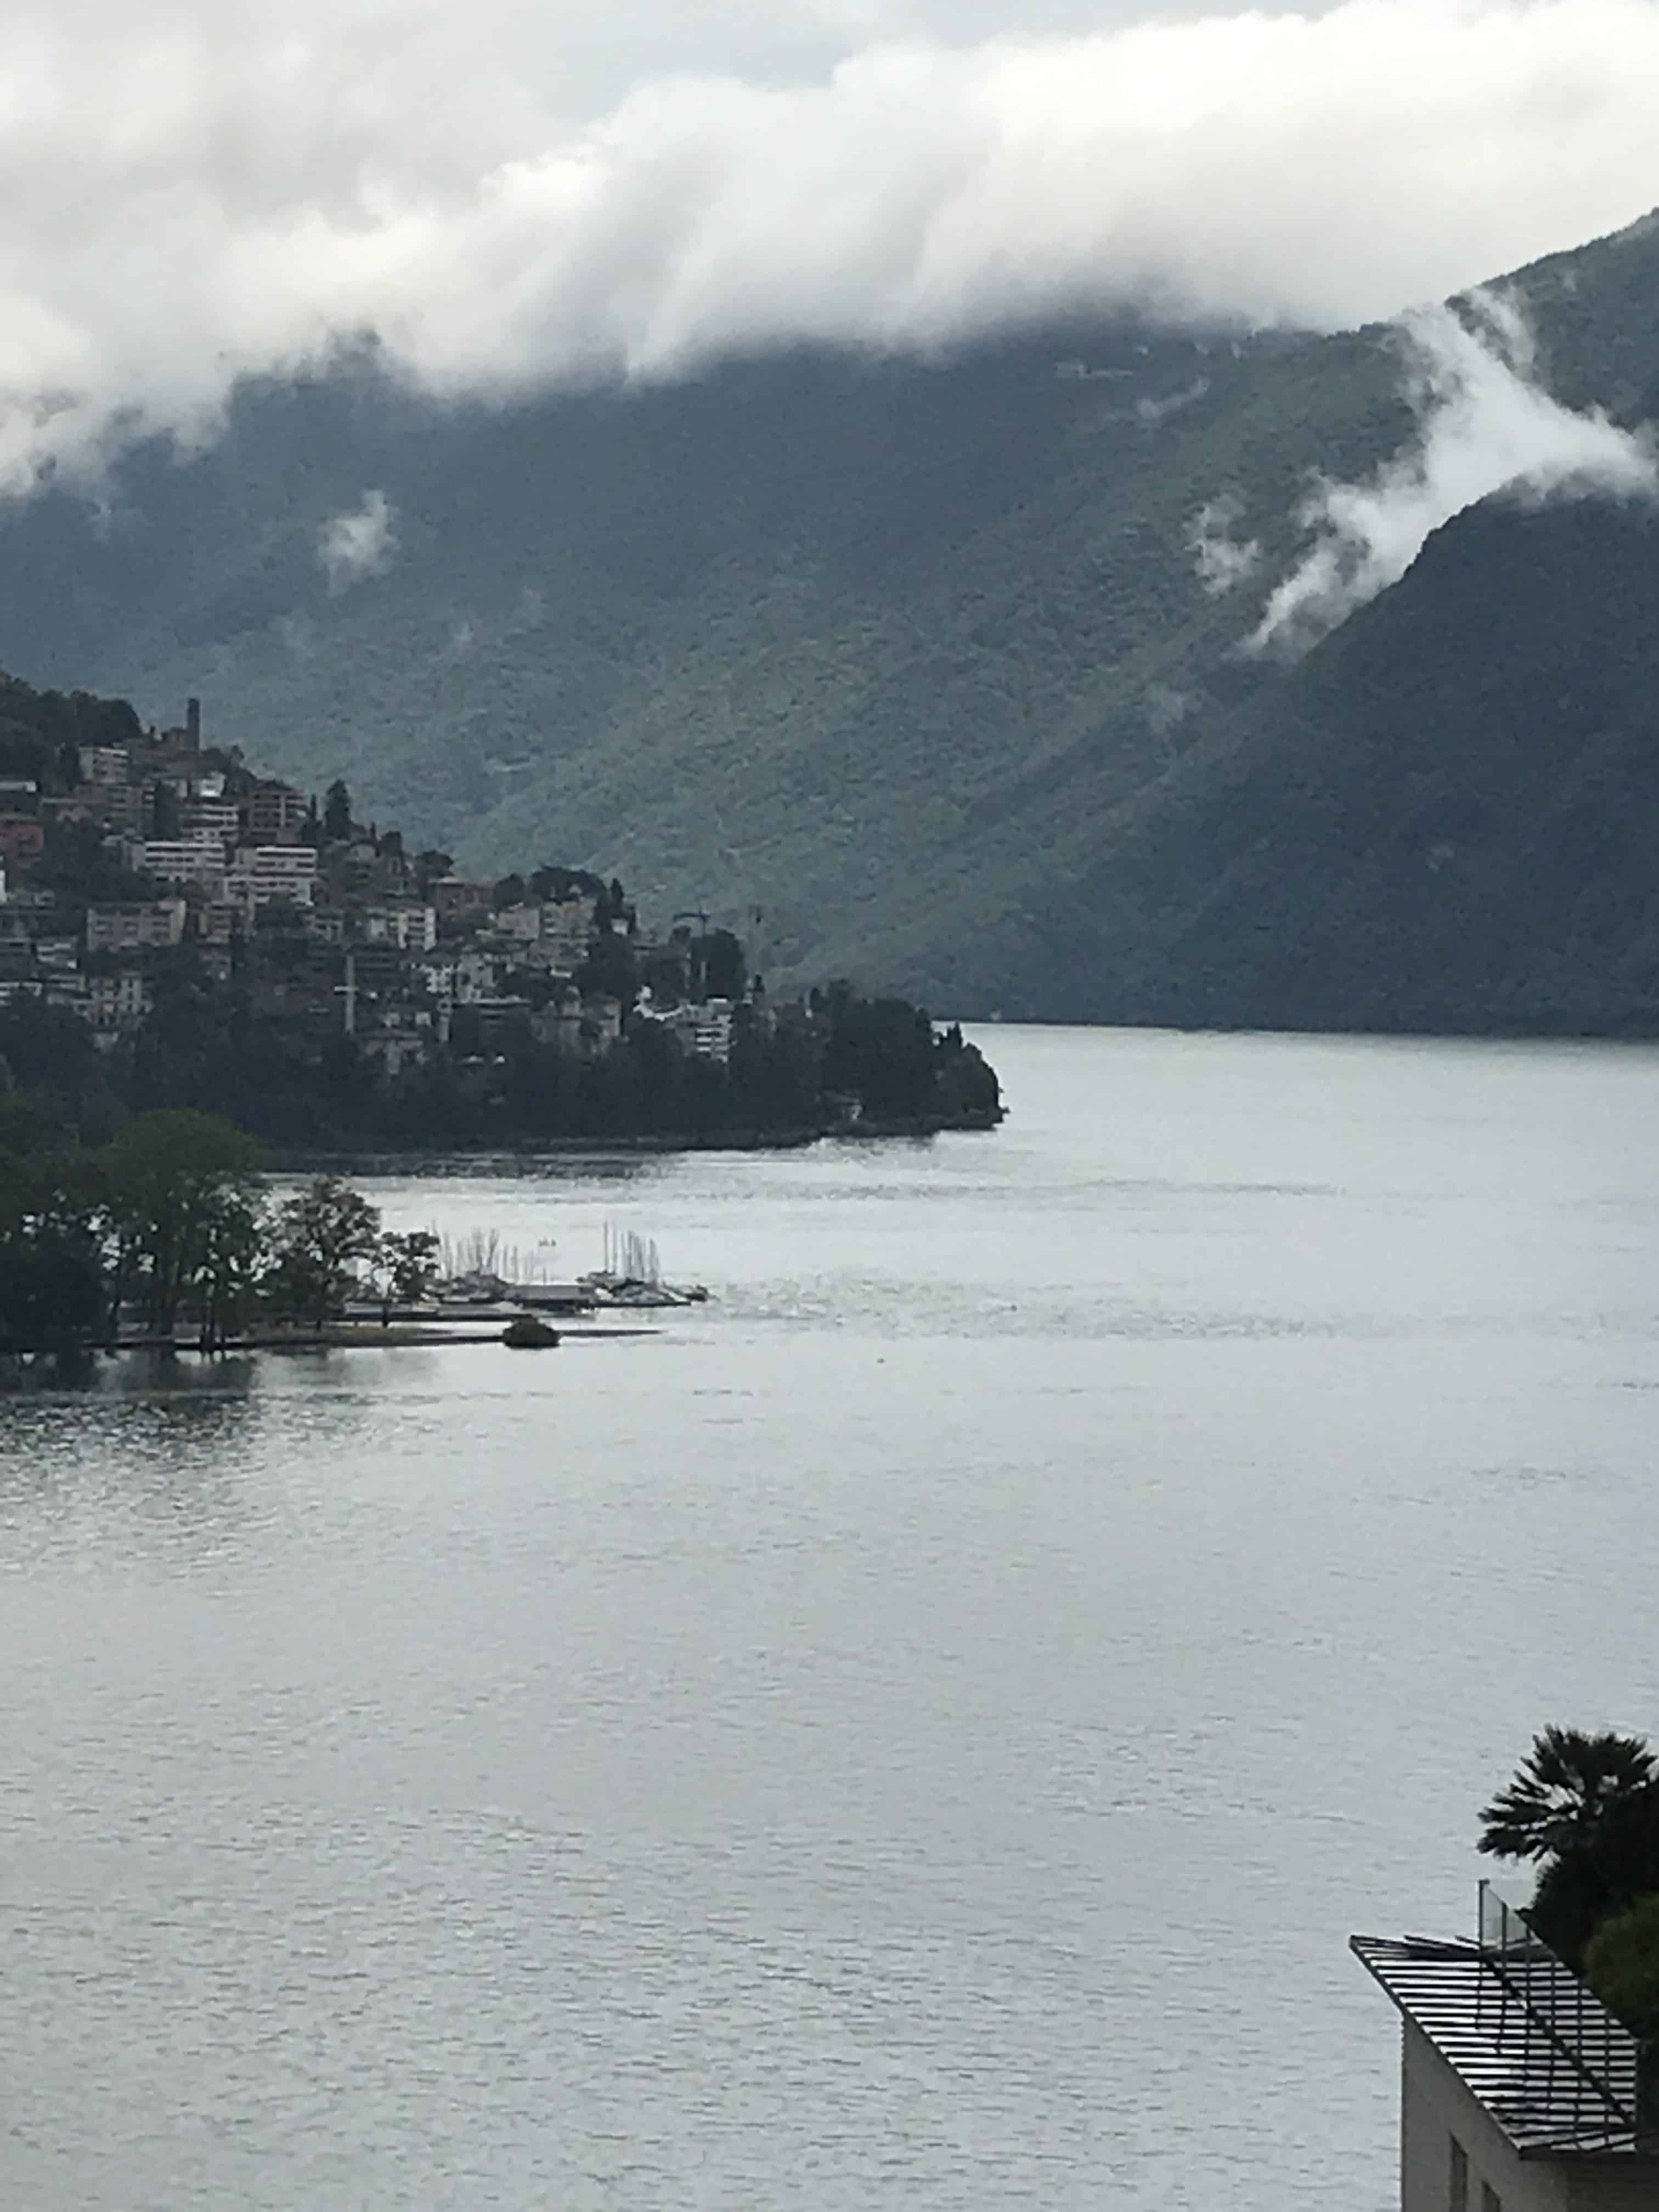 A Little Me Time In Ticino - How I Spent The Last Two Days! @shawsimpleswaps